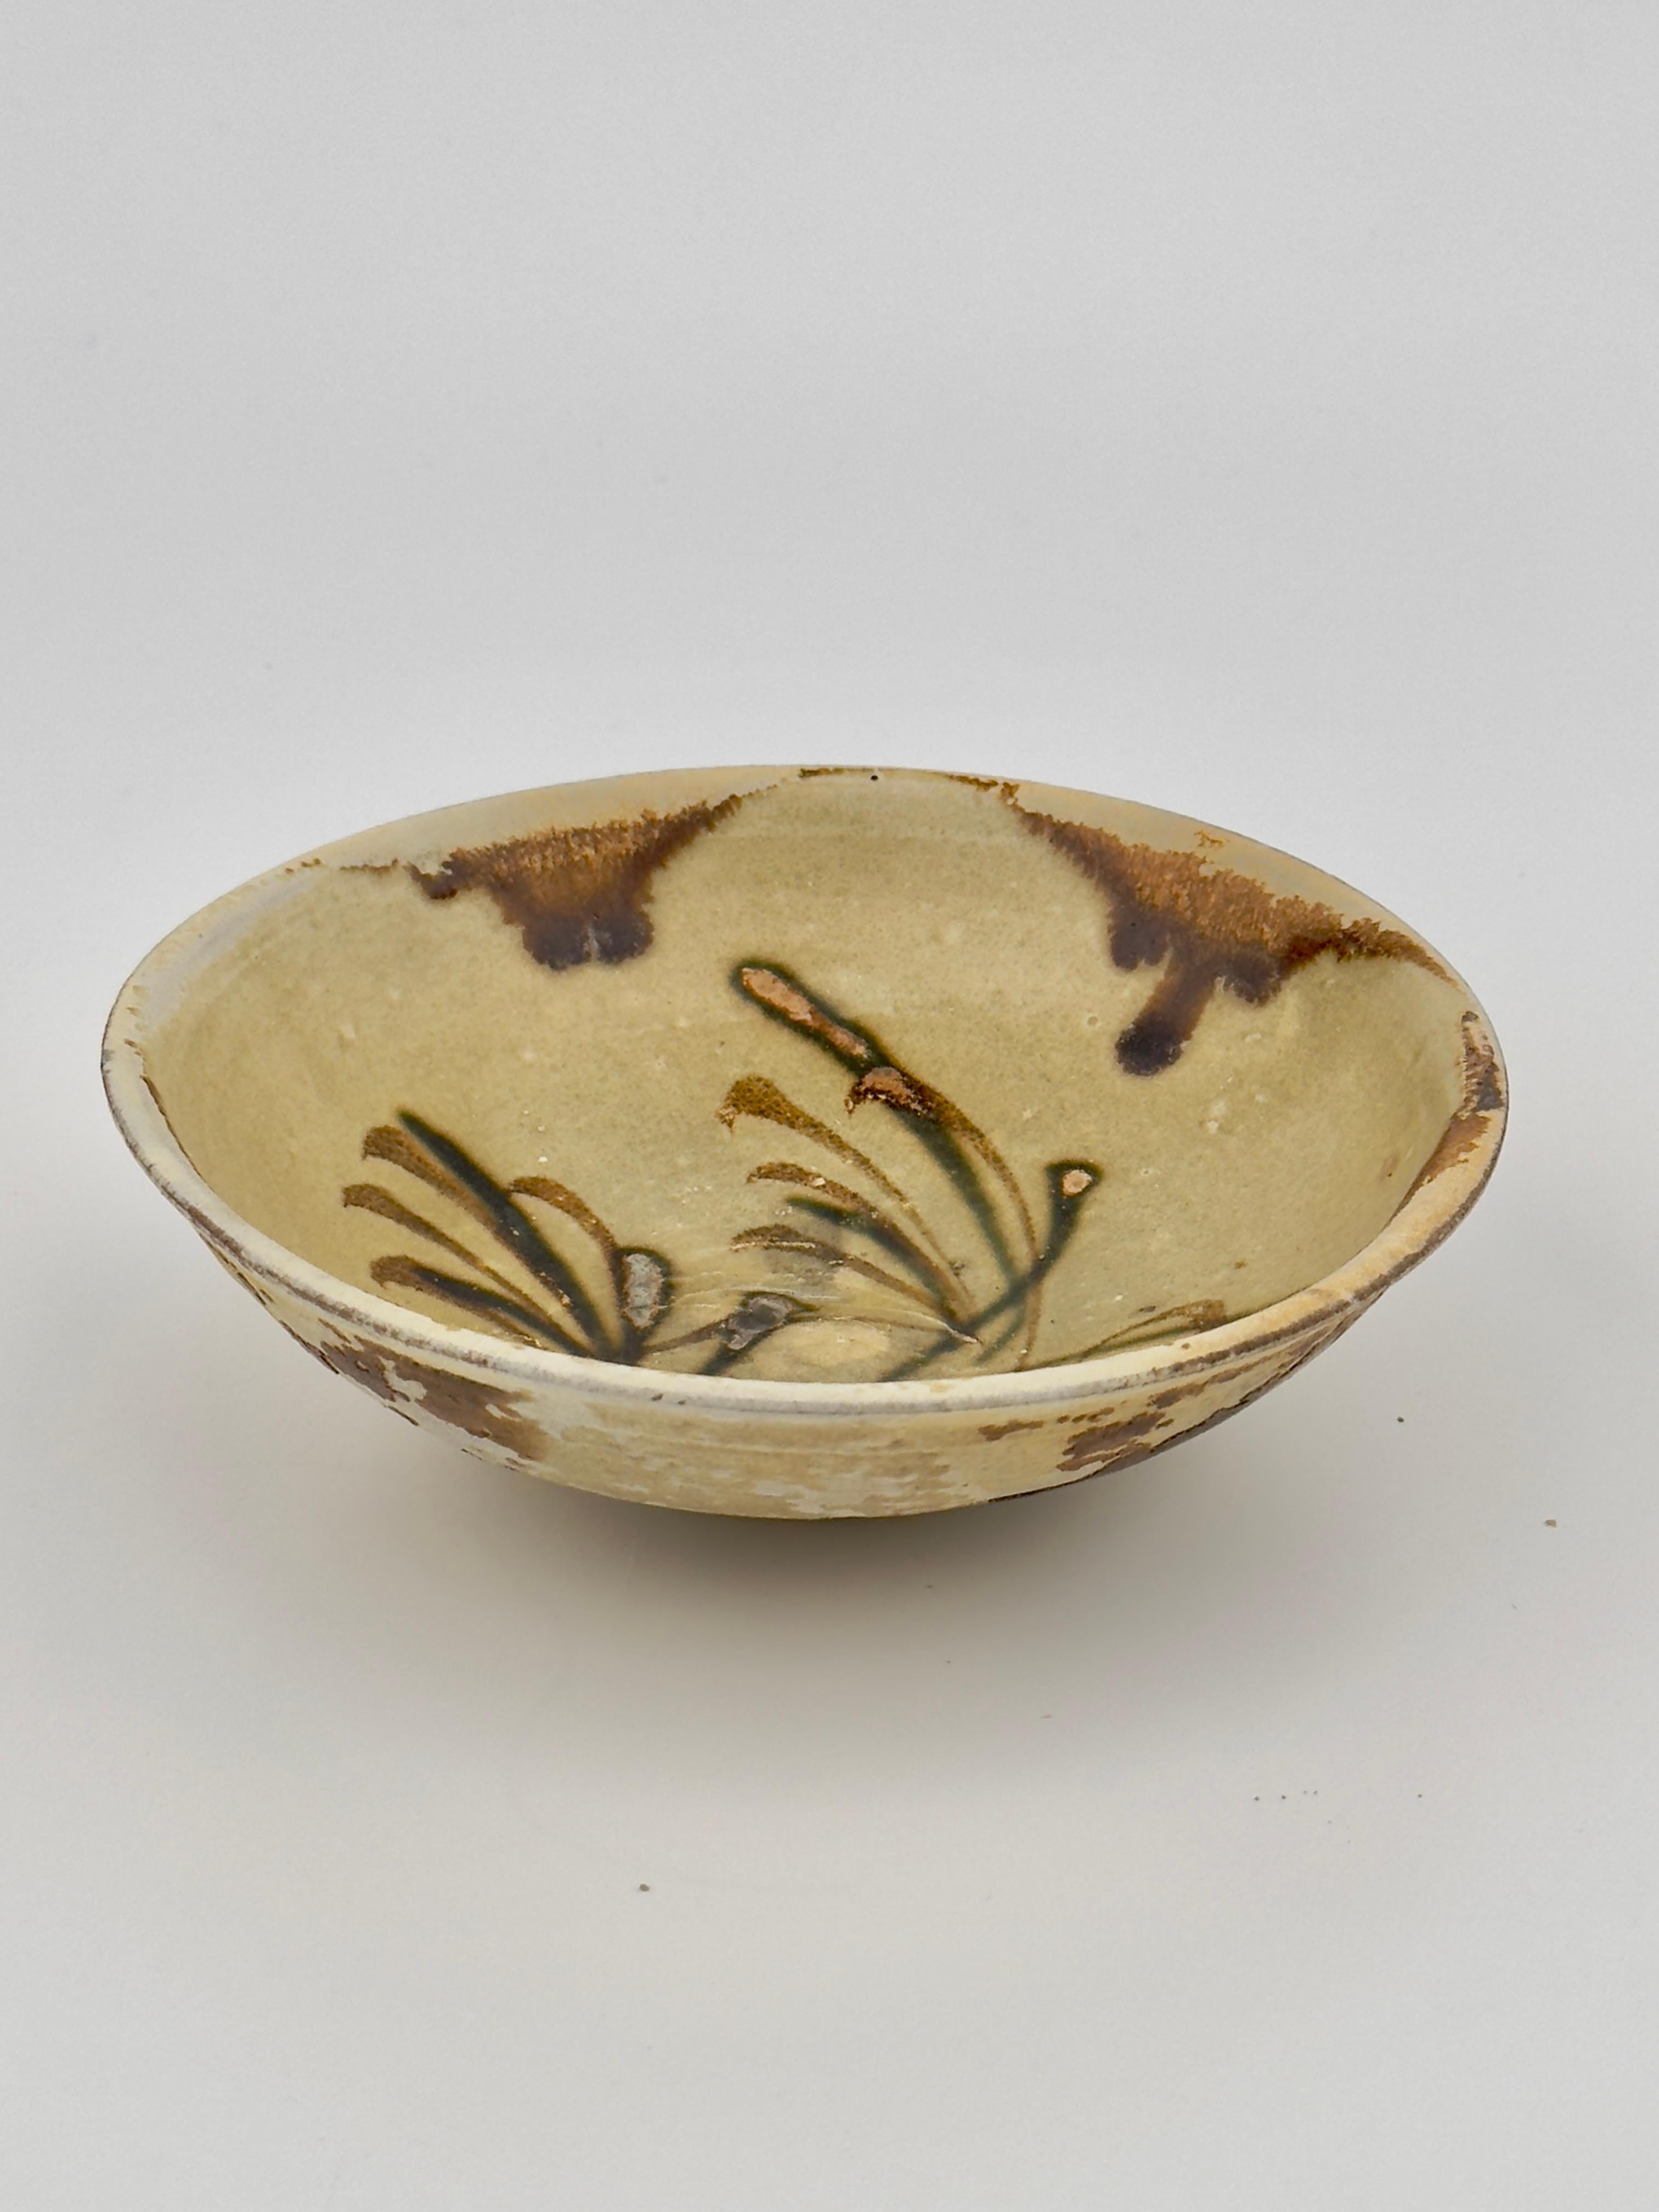 Changsha bowl with abstract pattern presumed to be Islamic symbols, Tang Dynasty For Sale 6